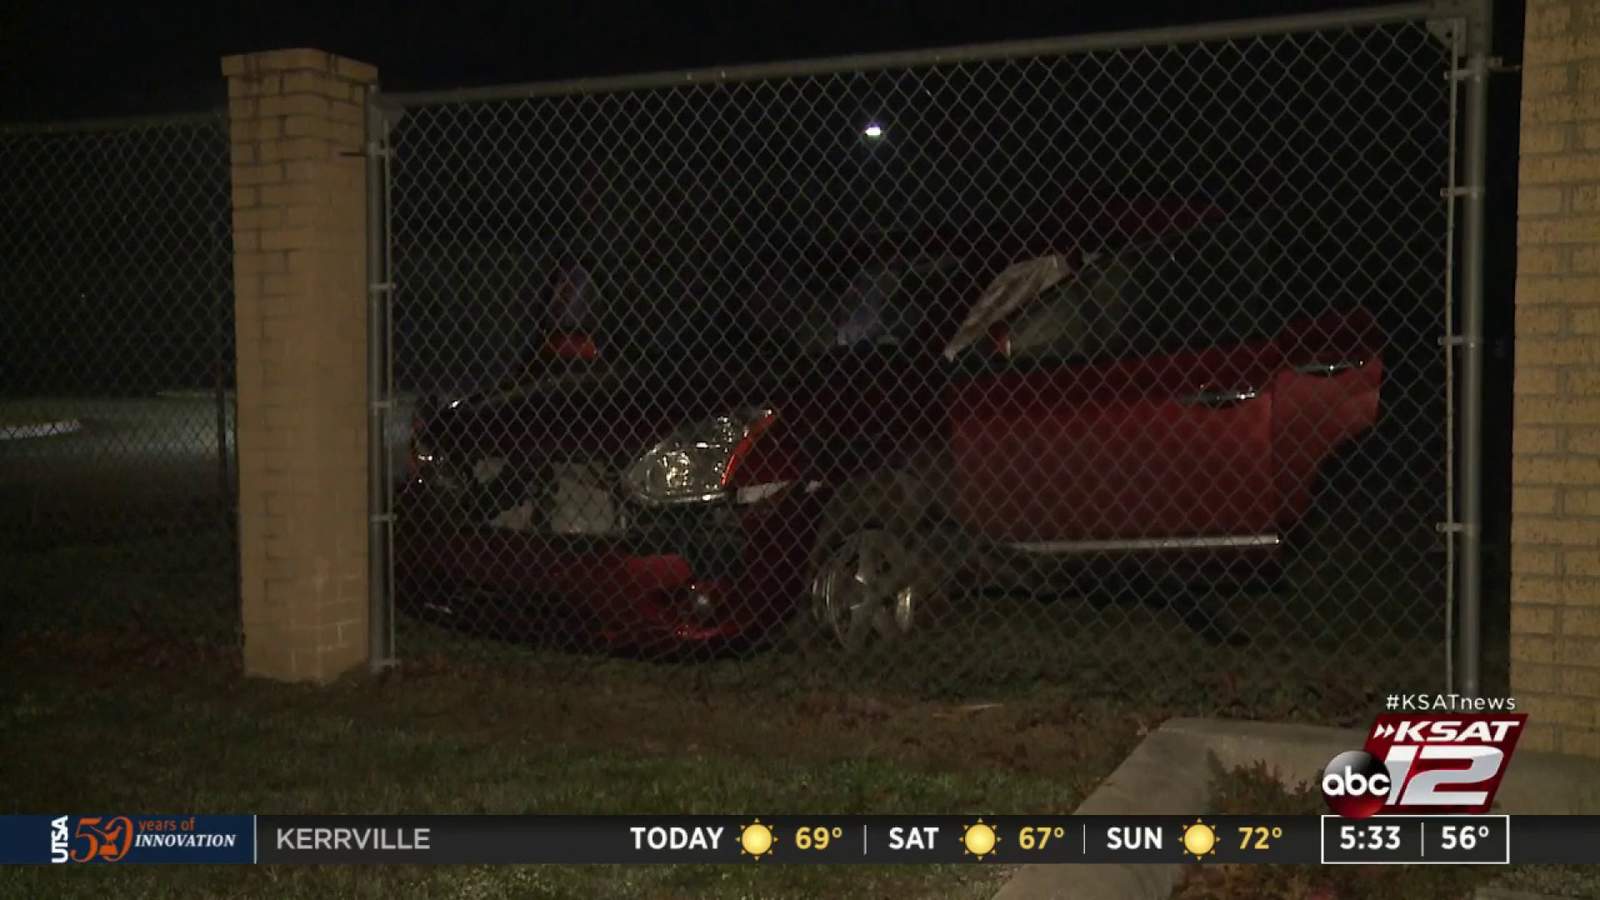 Car crashes into fence, driver flees, police say